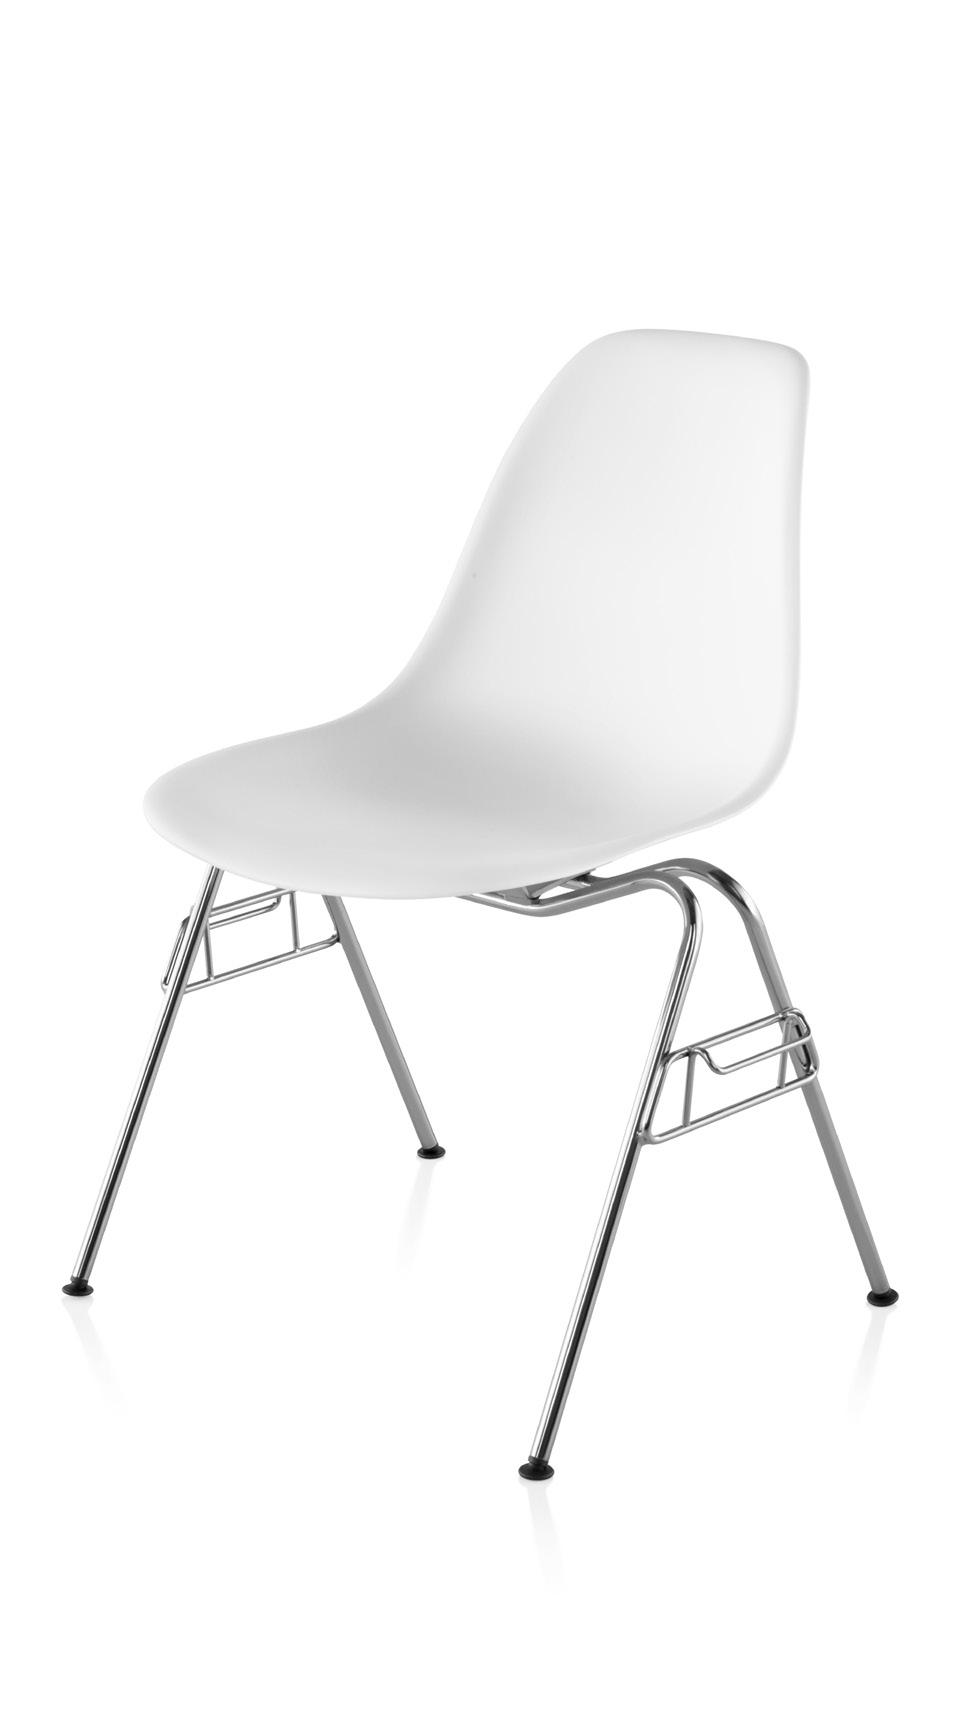 . Eames Molded Plastic Side Chair Stacking / Ganging Base The Eames molded plastic side chair exemplifies the designers mantra of the best for the most for the least, offering both style